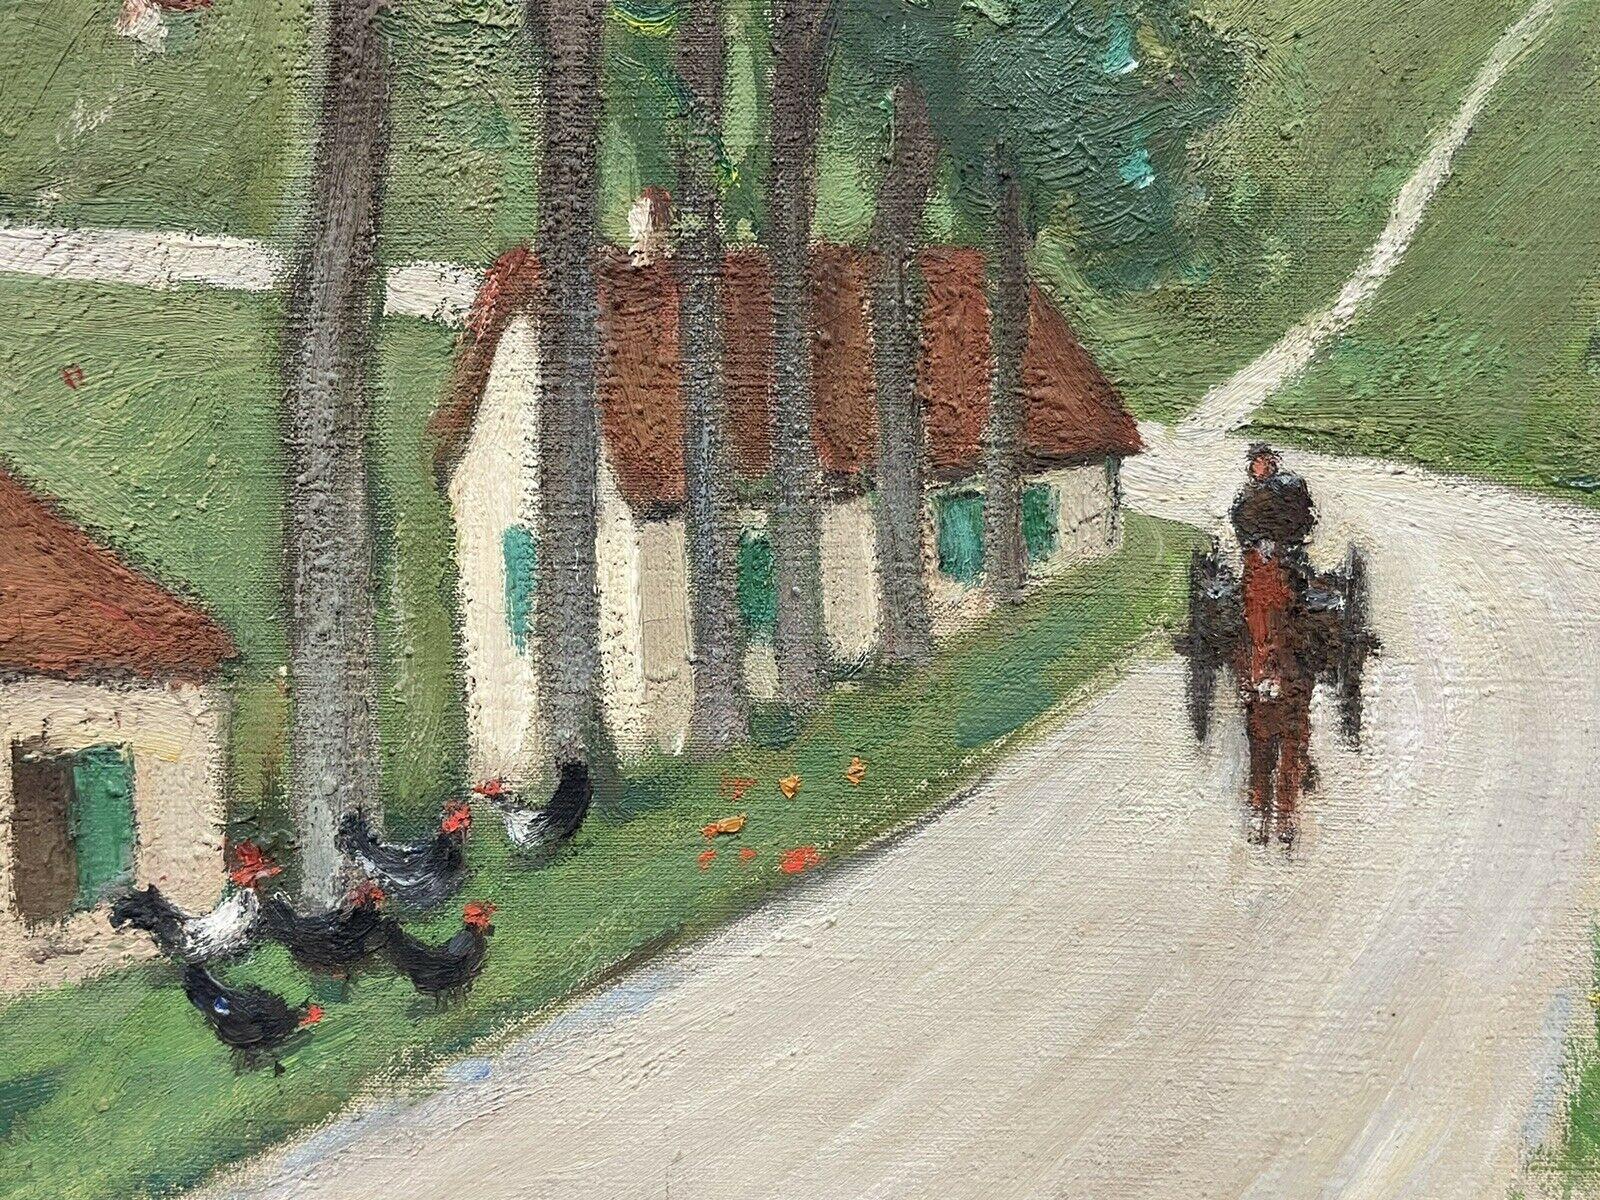 Artist/ School: Constant Dore (French 1883-1963), signed lower corner

Title: The Village Street. Beautiful quality work showing influence from the Pont-Aven School, with the thick almost block colour square brushwork and color palette. The artist